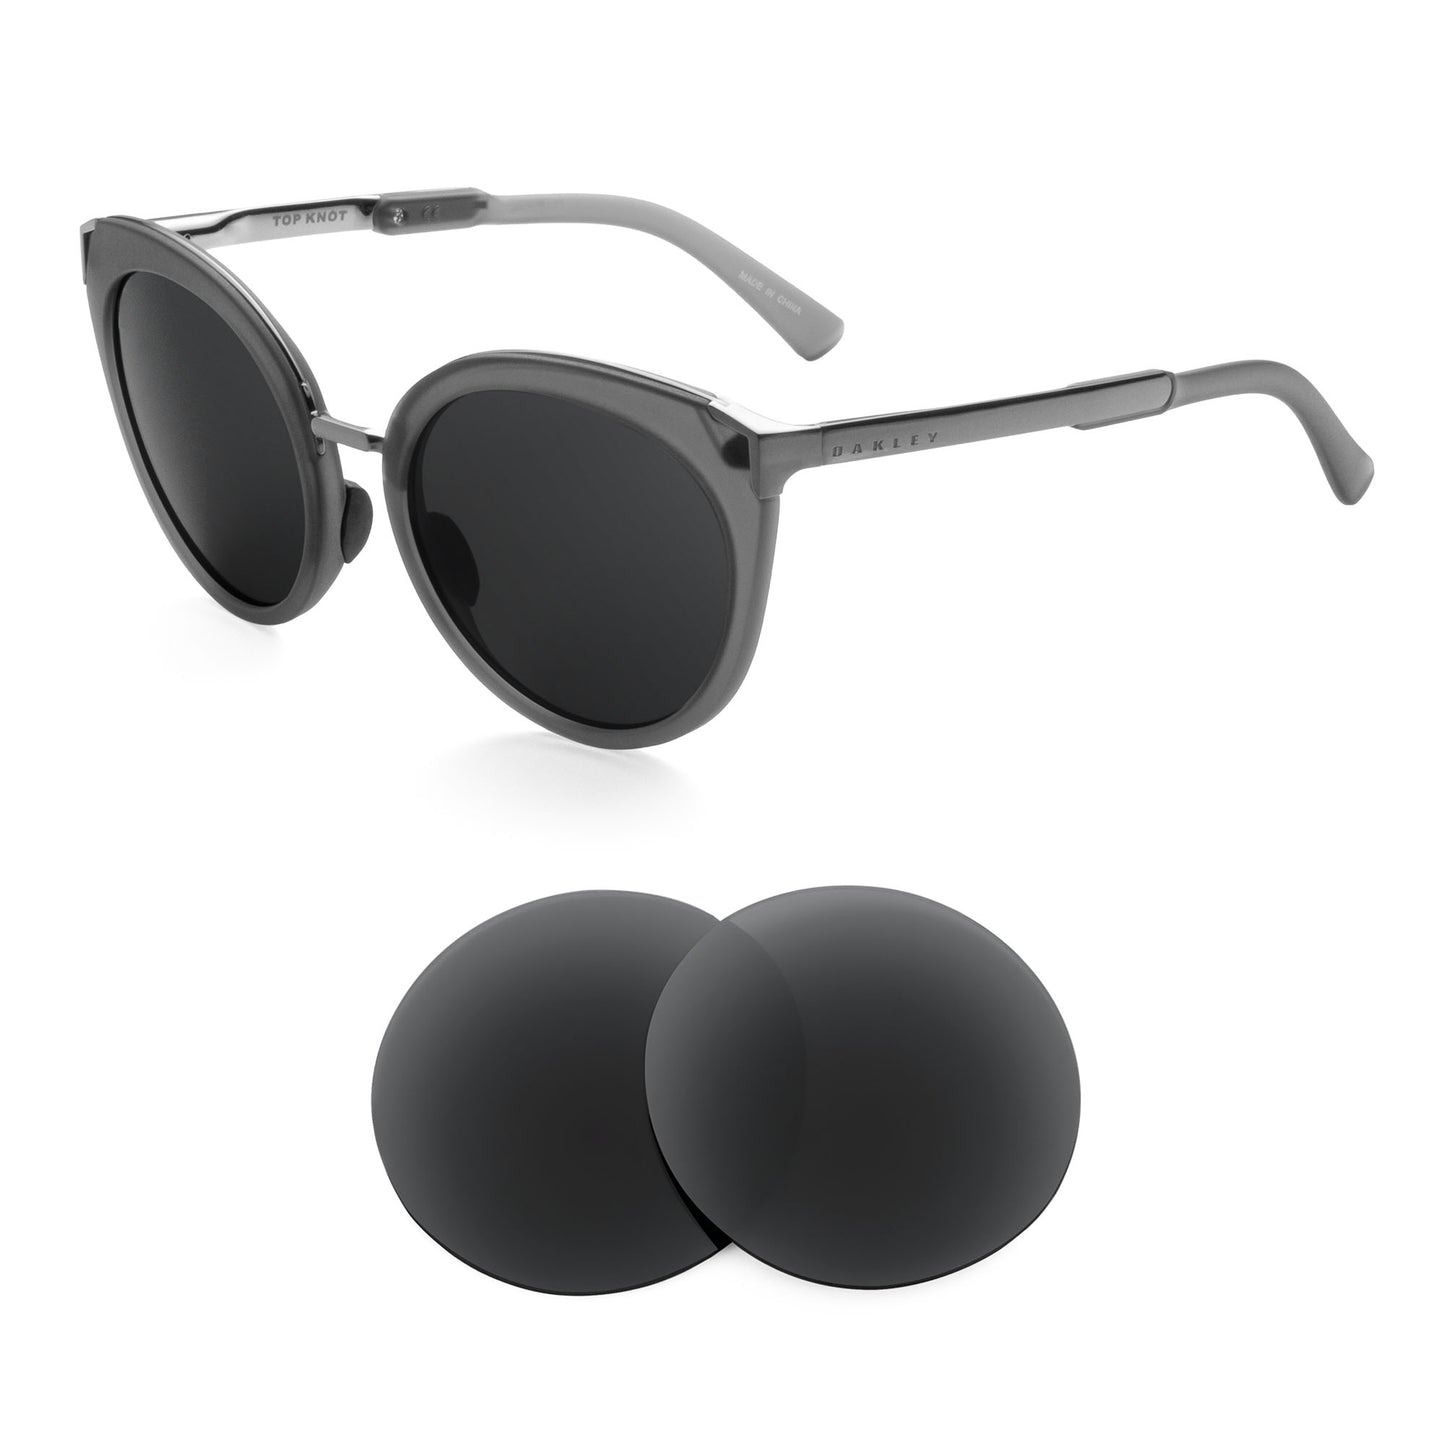 Oakley Top Knot sunglasses with replacement lenses